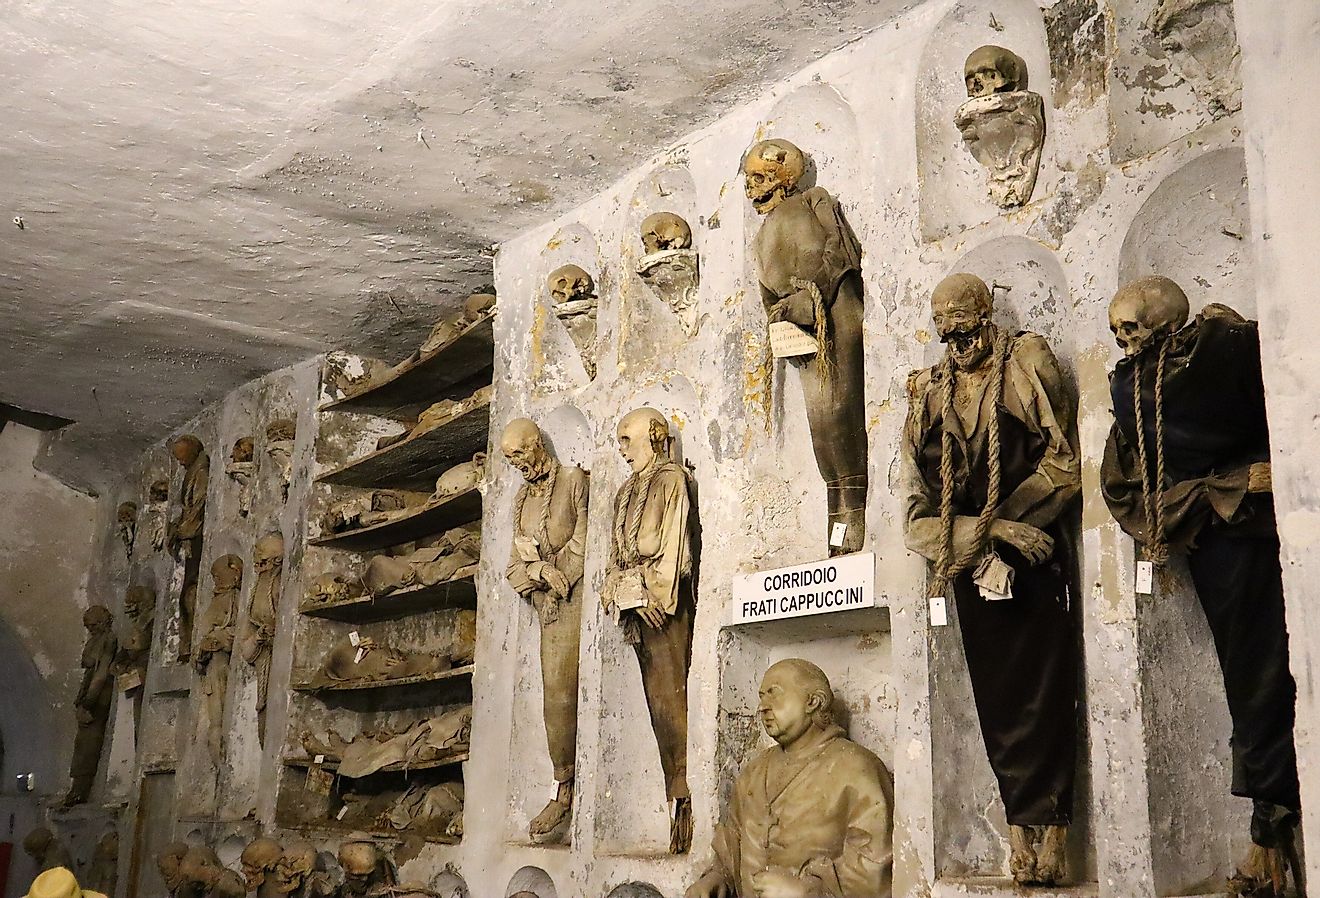 Palermo, Italy: Catacombs of the Capuchins -- burial catacombs in Palermo. Image credit Walter Cicchetti via AdobeStock.